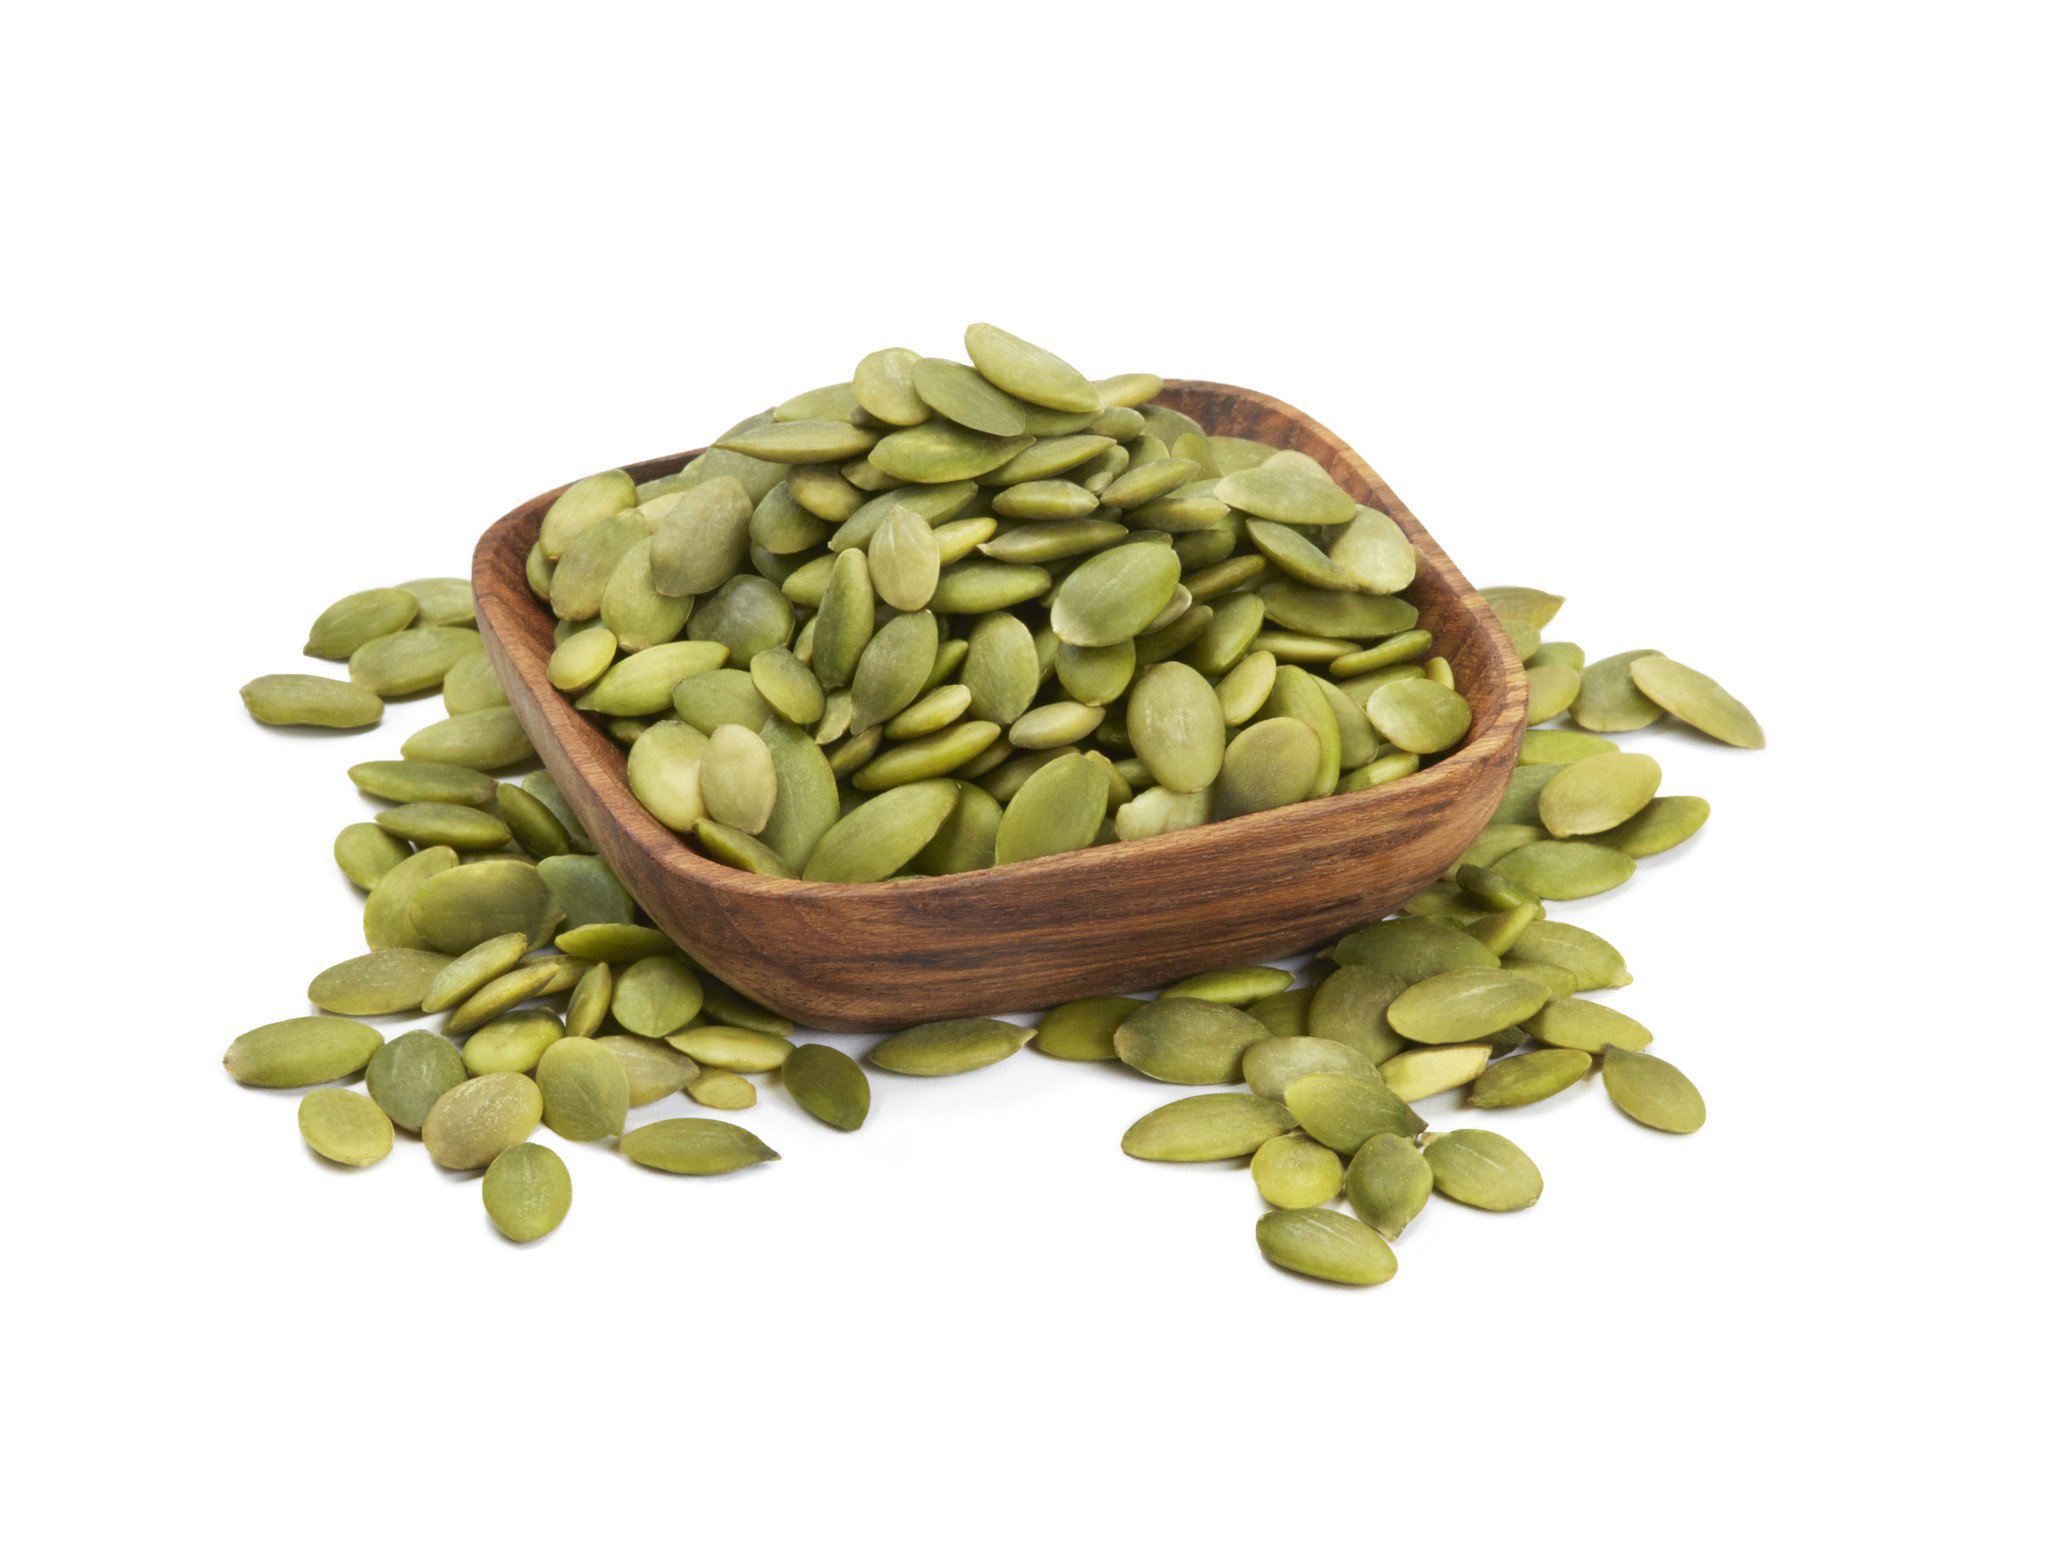 Pumpkin Seeds Facts, Health Benefits and Nutritional Value